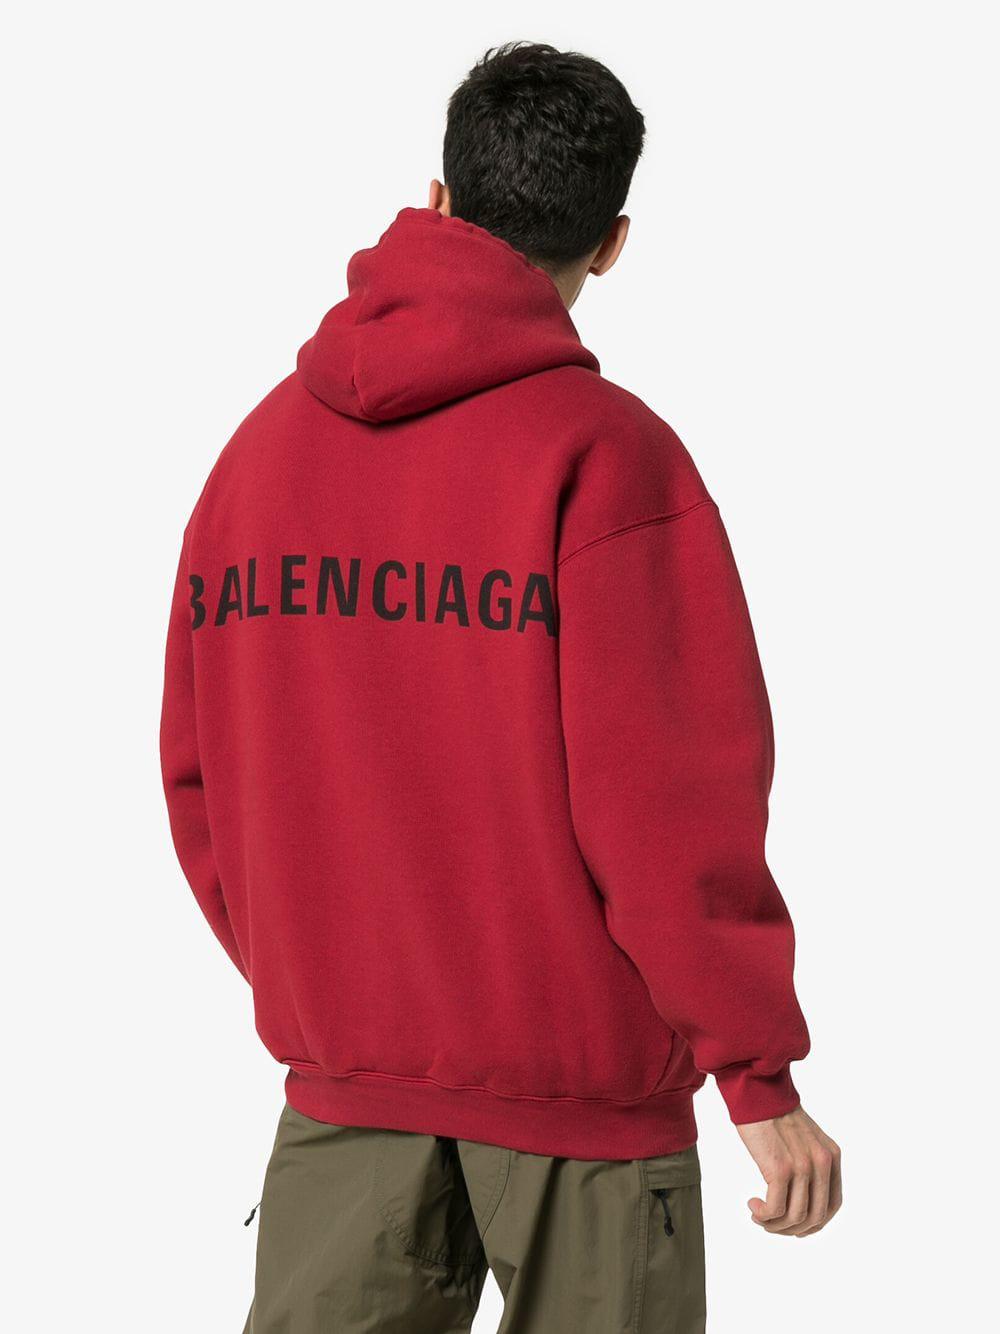 Balenciaga Cotton Oversized Large Logo Hoodie in Red for Men - Lyst